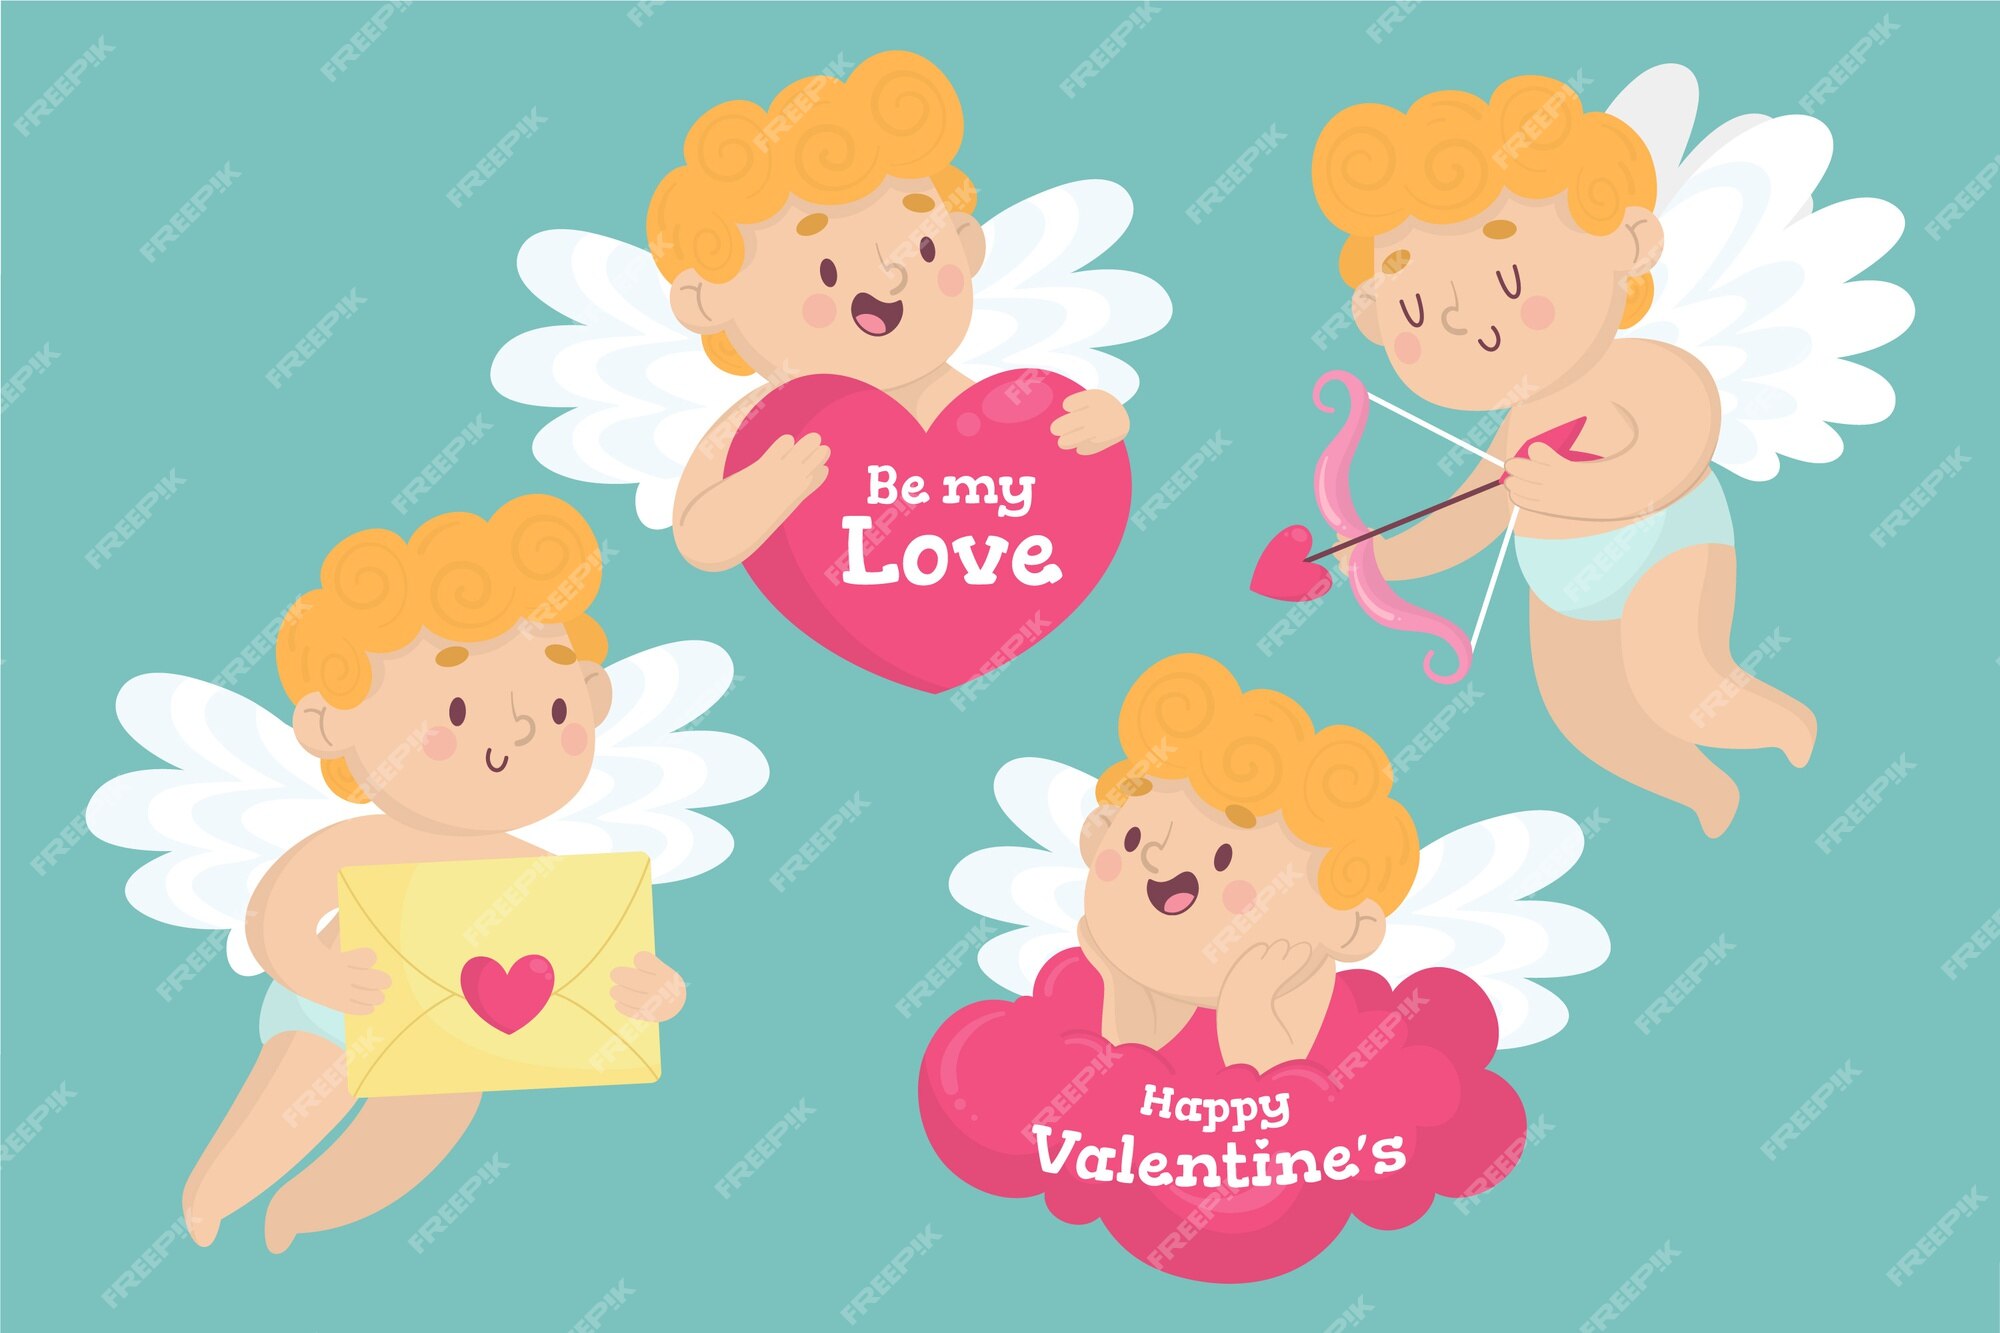 Free Vector Hand Drawn Cupid Character Collection 4484